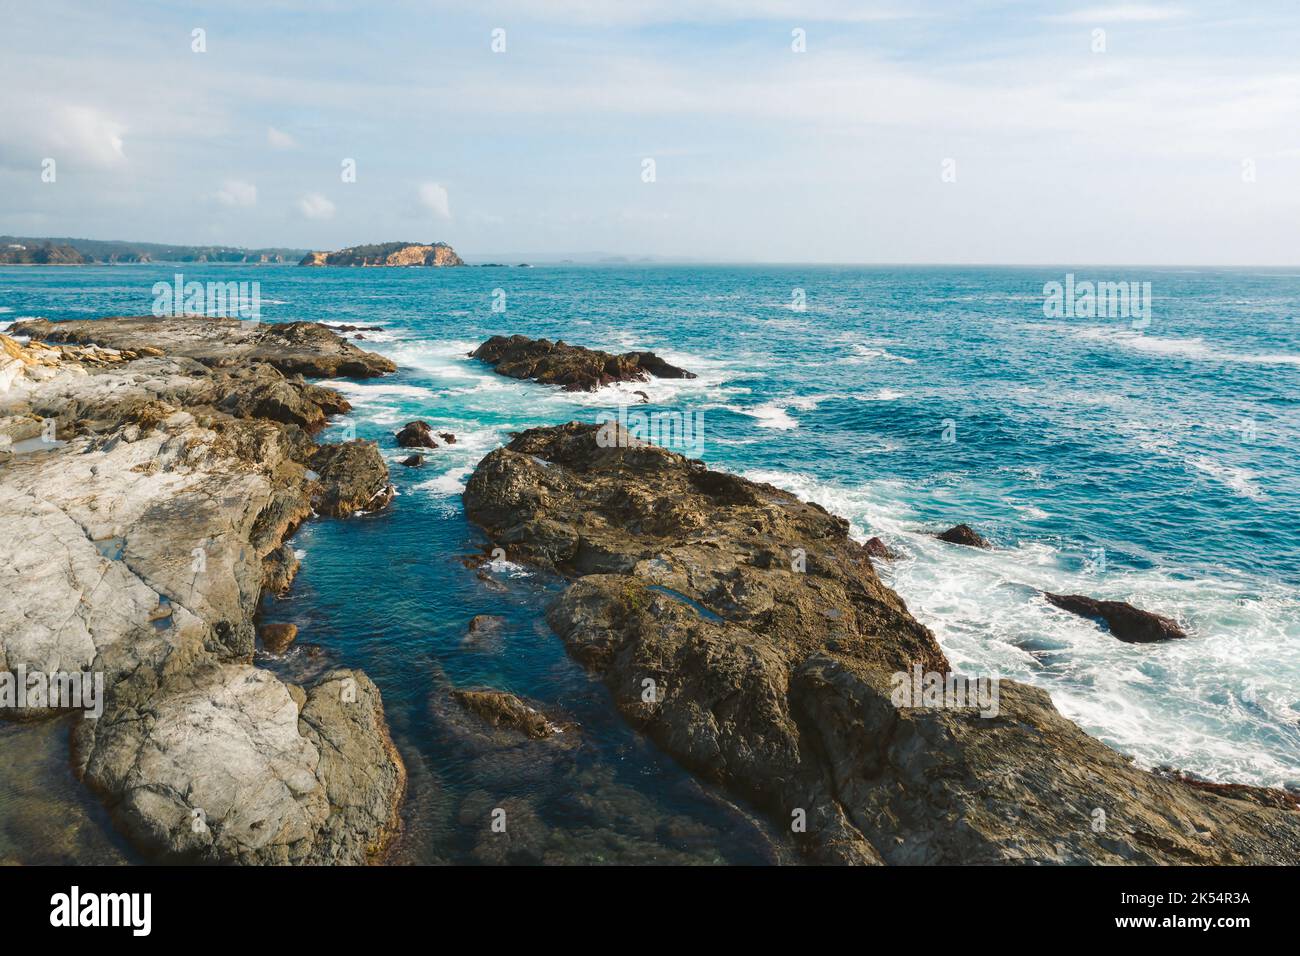 Coastal seascape with rocky fingers protruding the coast and views to the small islands Stock Photo